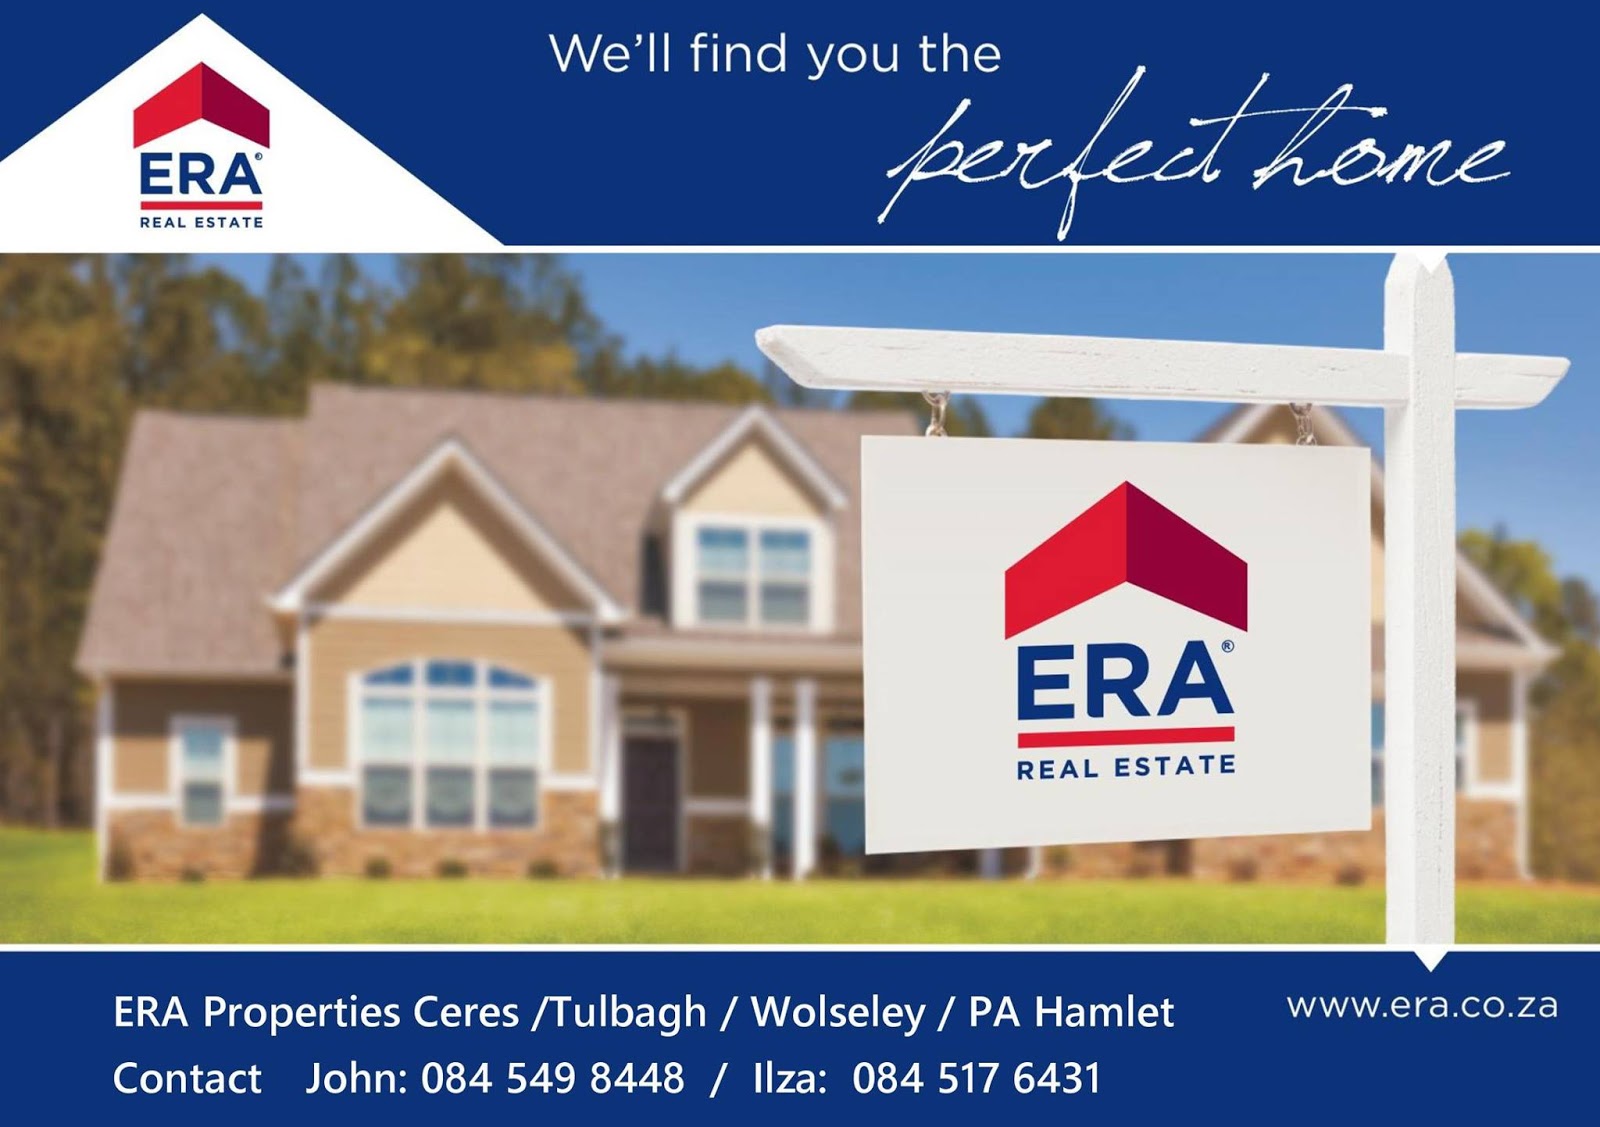 ERA Real Estate: We will find you the perfect home!